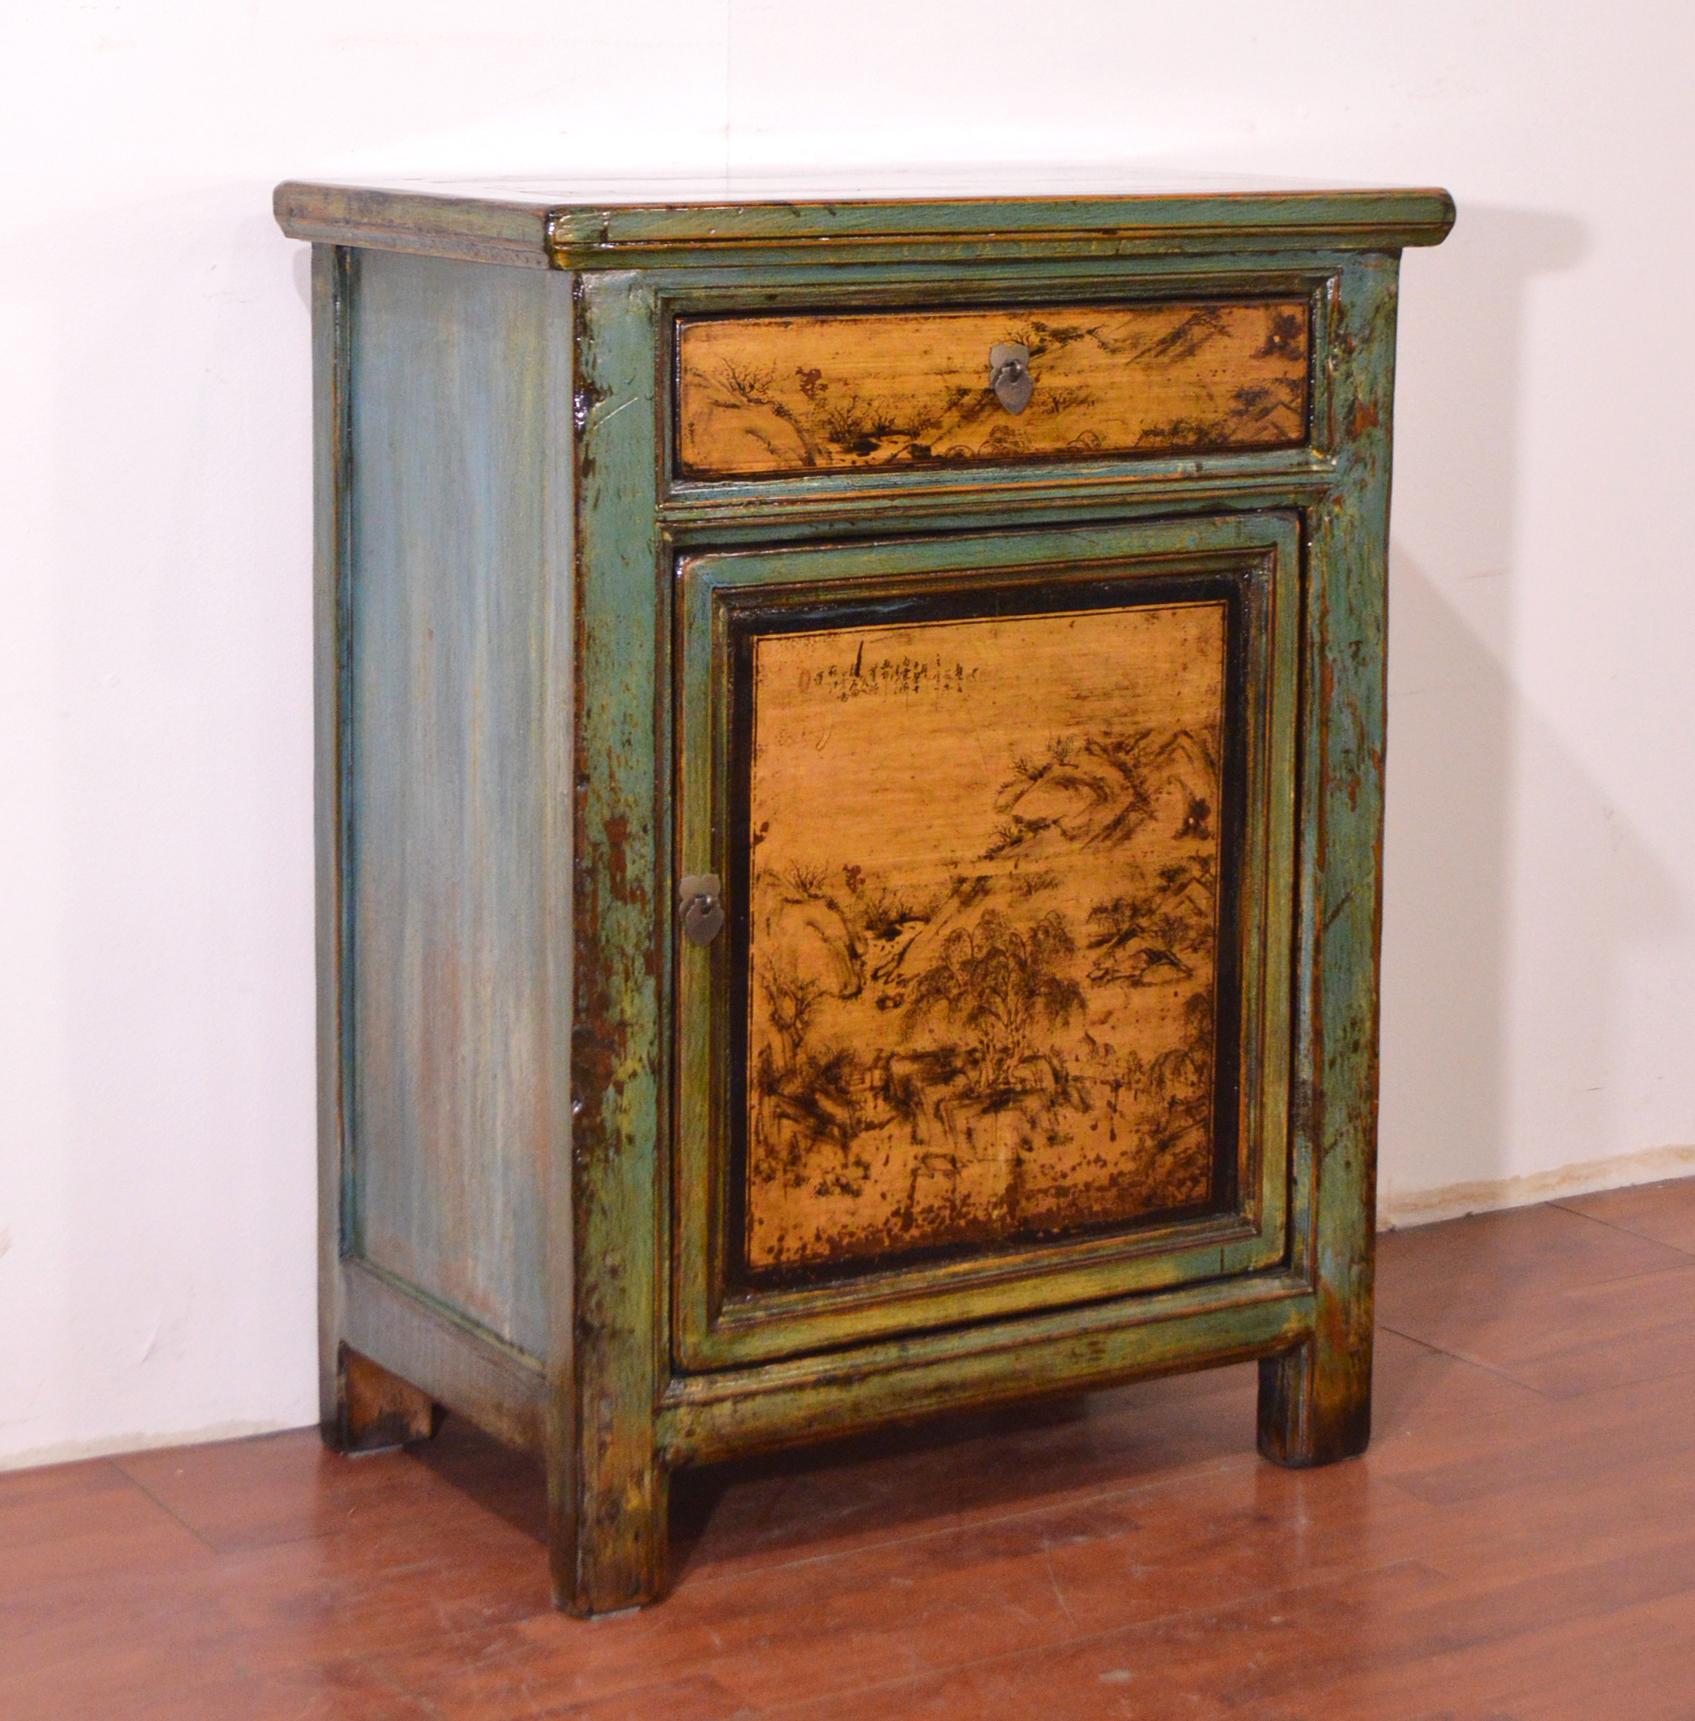 Elegant mid 20th century Chinese buffet elm wooden. In the lacquered green of the sides and the front emerge a quite large door and a drawer in mustard yellow where some figurative drawings stand out. Through them we can almost immerge ourselves